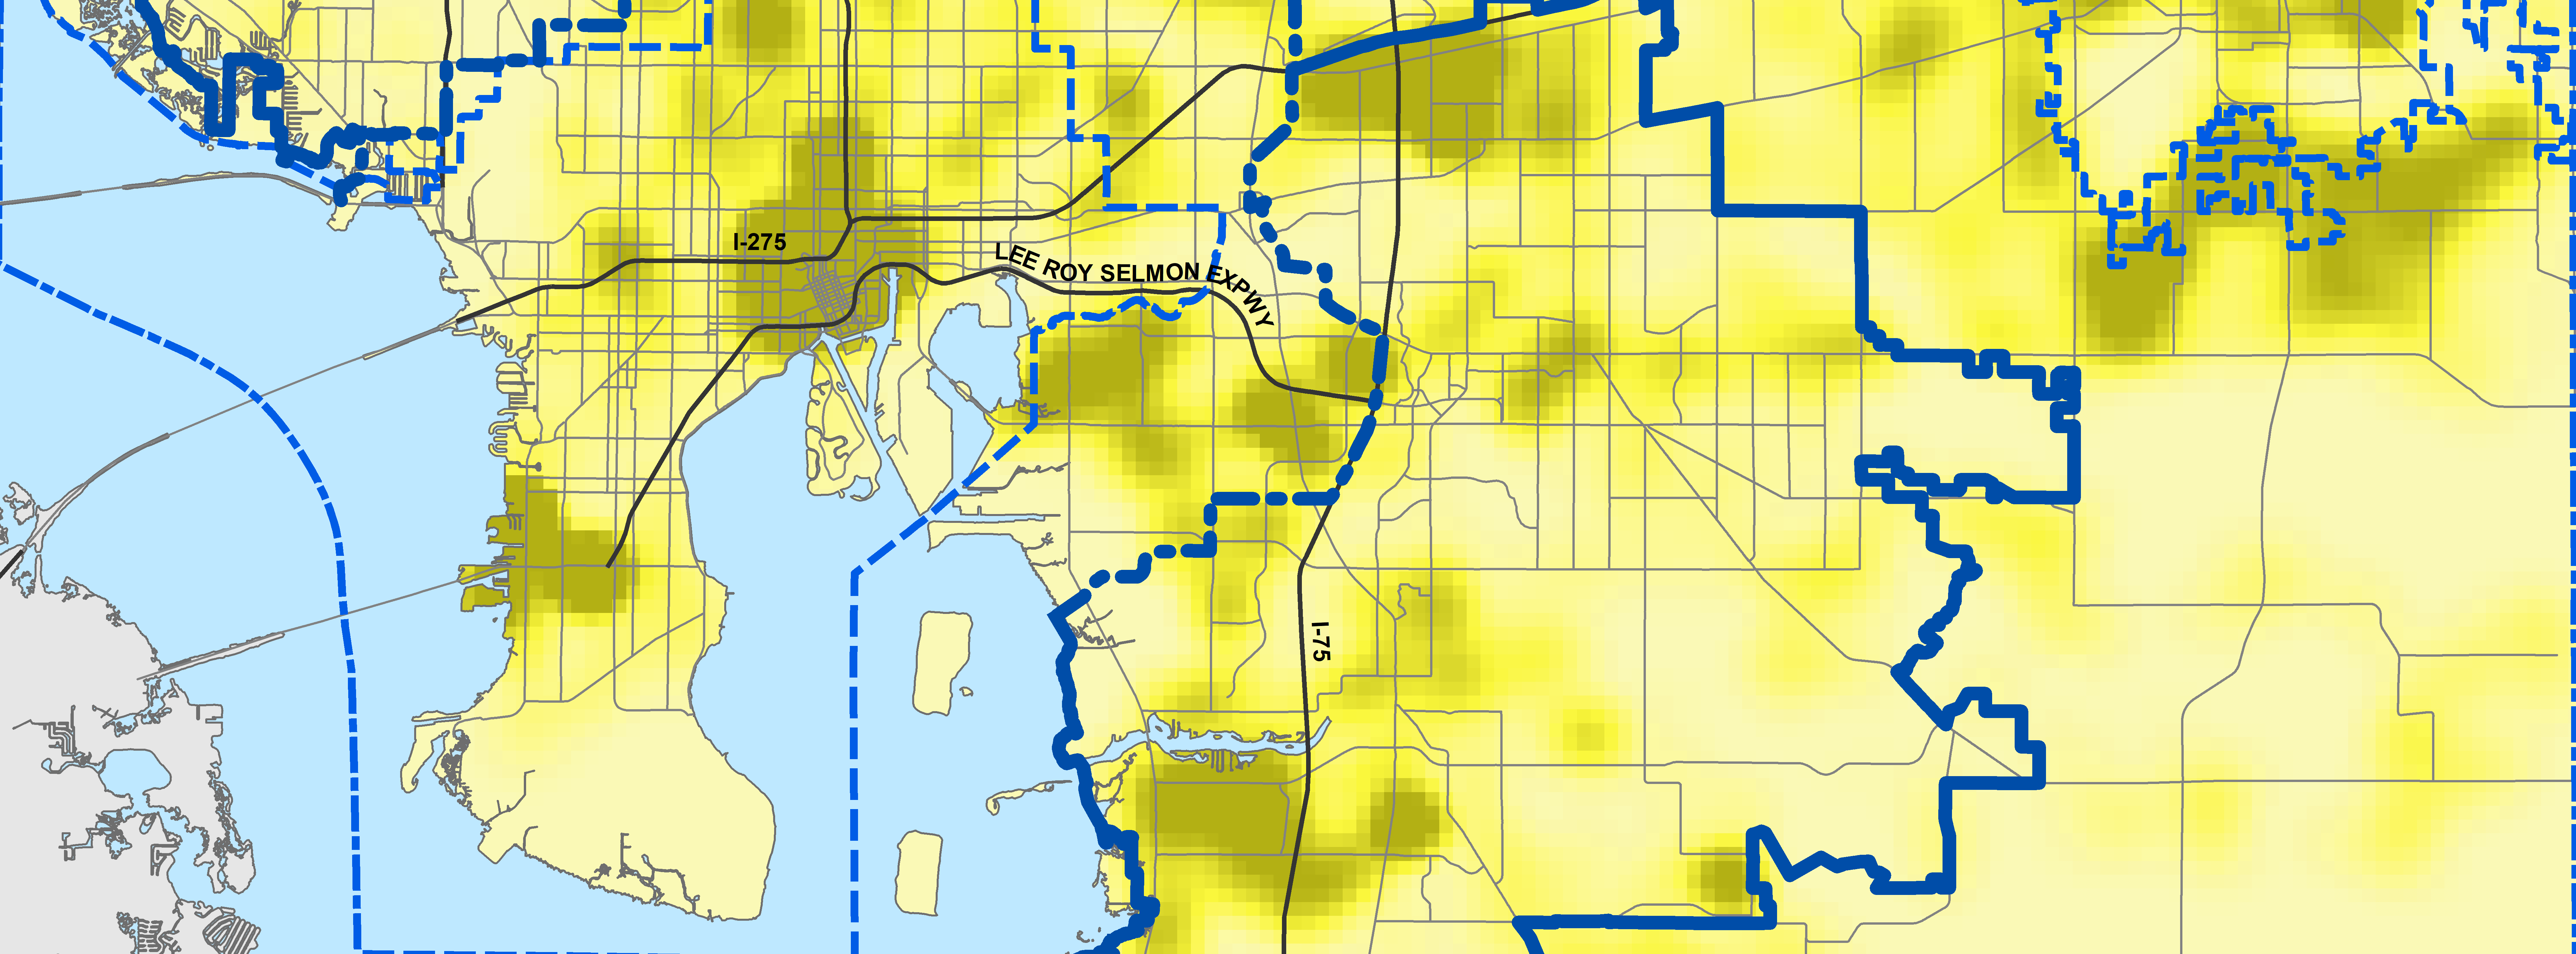 Map shows Kernel Density of new housing units per acre through 2050. Darker yellow means more new housing units.